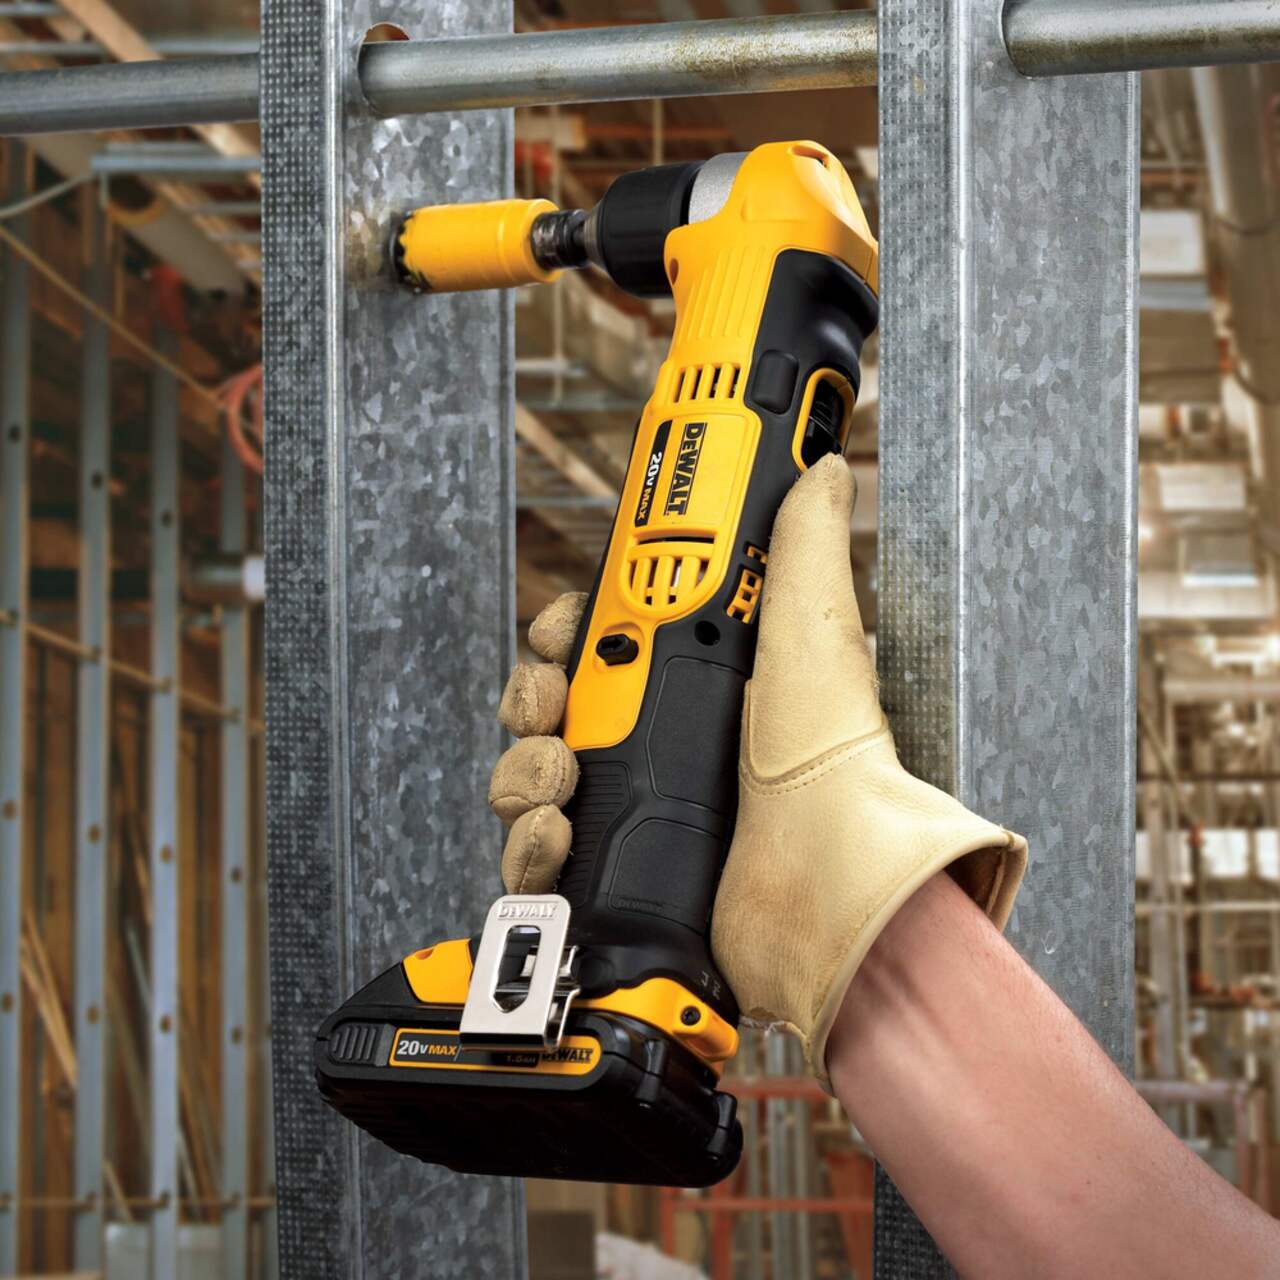 DEWALT DCD740C1 20V MAX Compact Right Angle Drill Driver Kit, 3/8-in, 1.3Ah